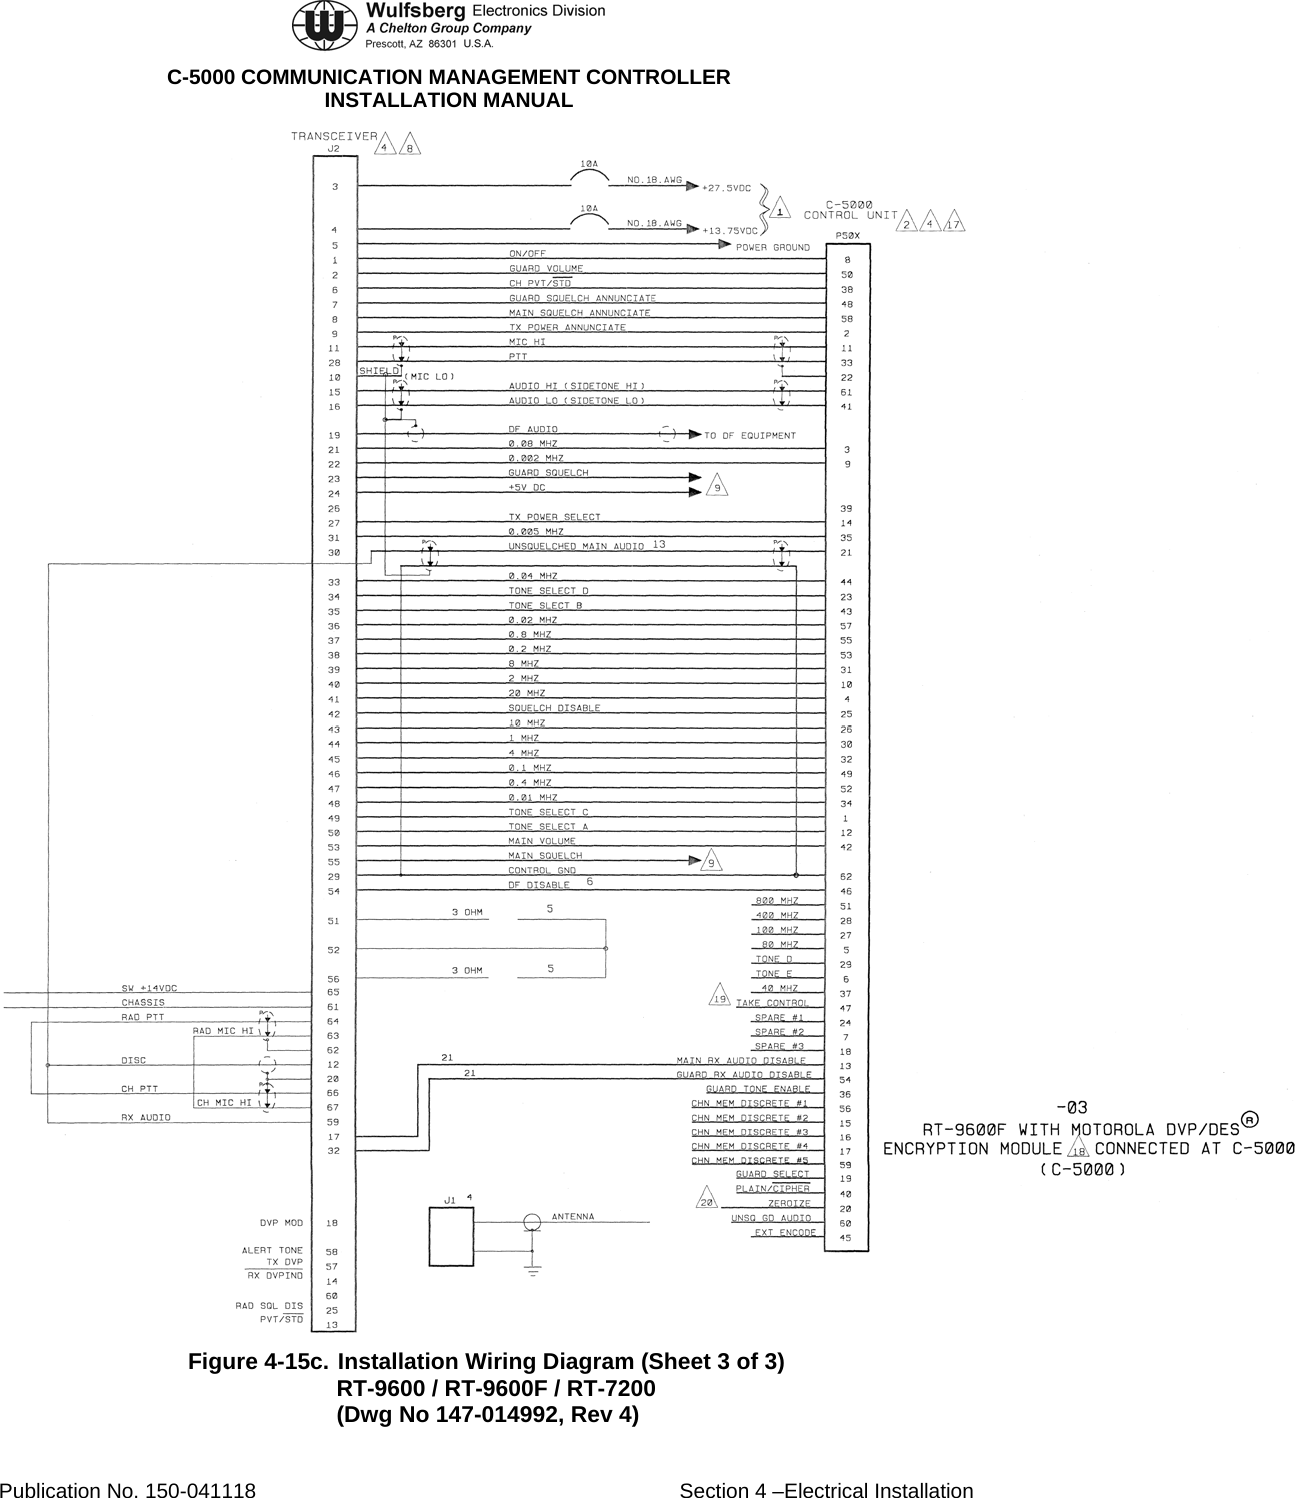  C-5000 COMMUNICATION MANAGEMENT CONTROLLER INSTALLATION MANUAL  Figure 4-15c. Installation Wiring Diagram (Sheet 3 of 3) RT-9600 / RT-9600F / RT-7200 (Dwg No 147-014992, Rev 4) Publication No. 150-041118  Section 4 –Electrical Installation 